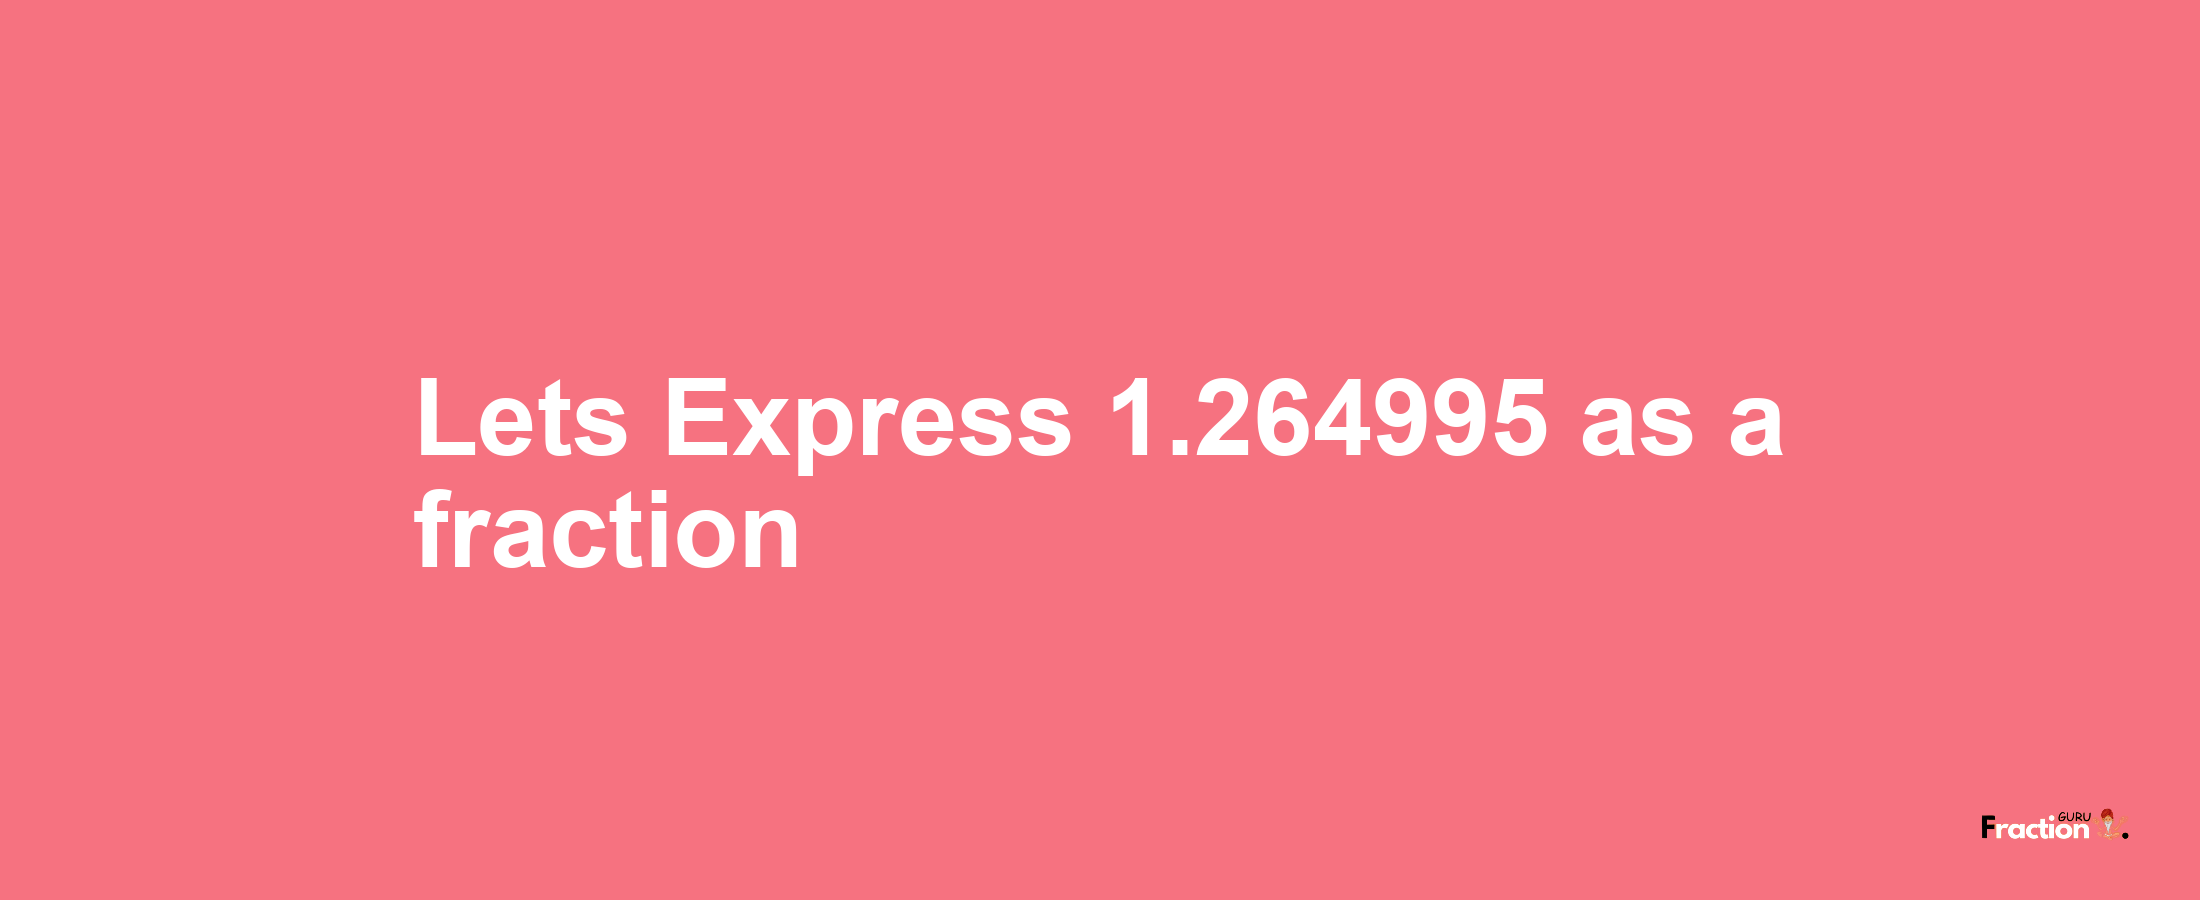 Lets Express 1.264995 as afraction